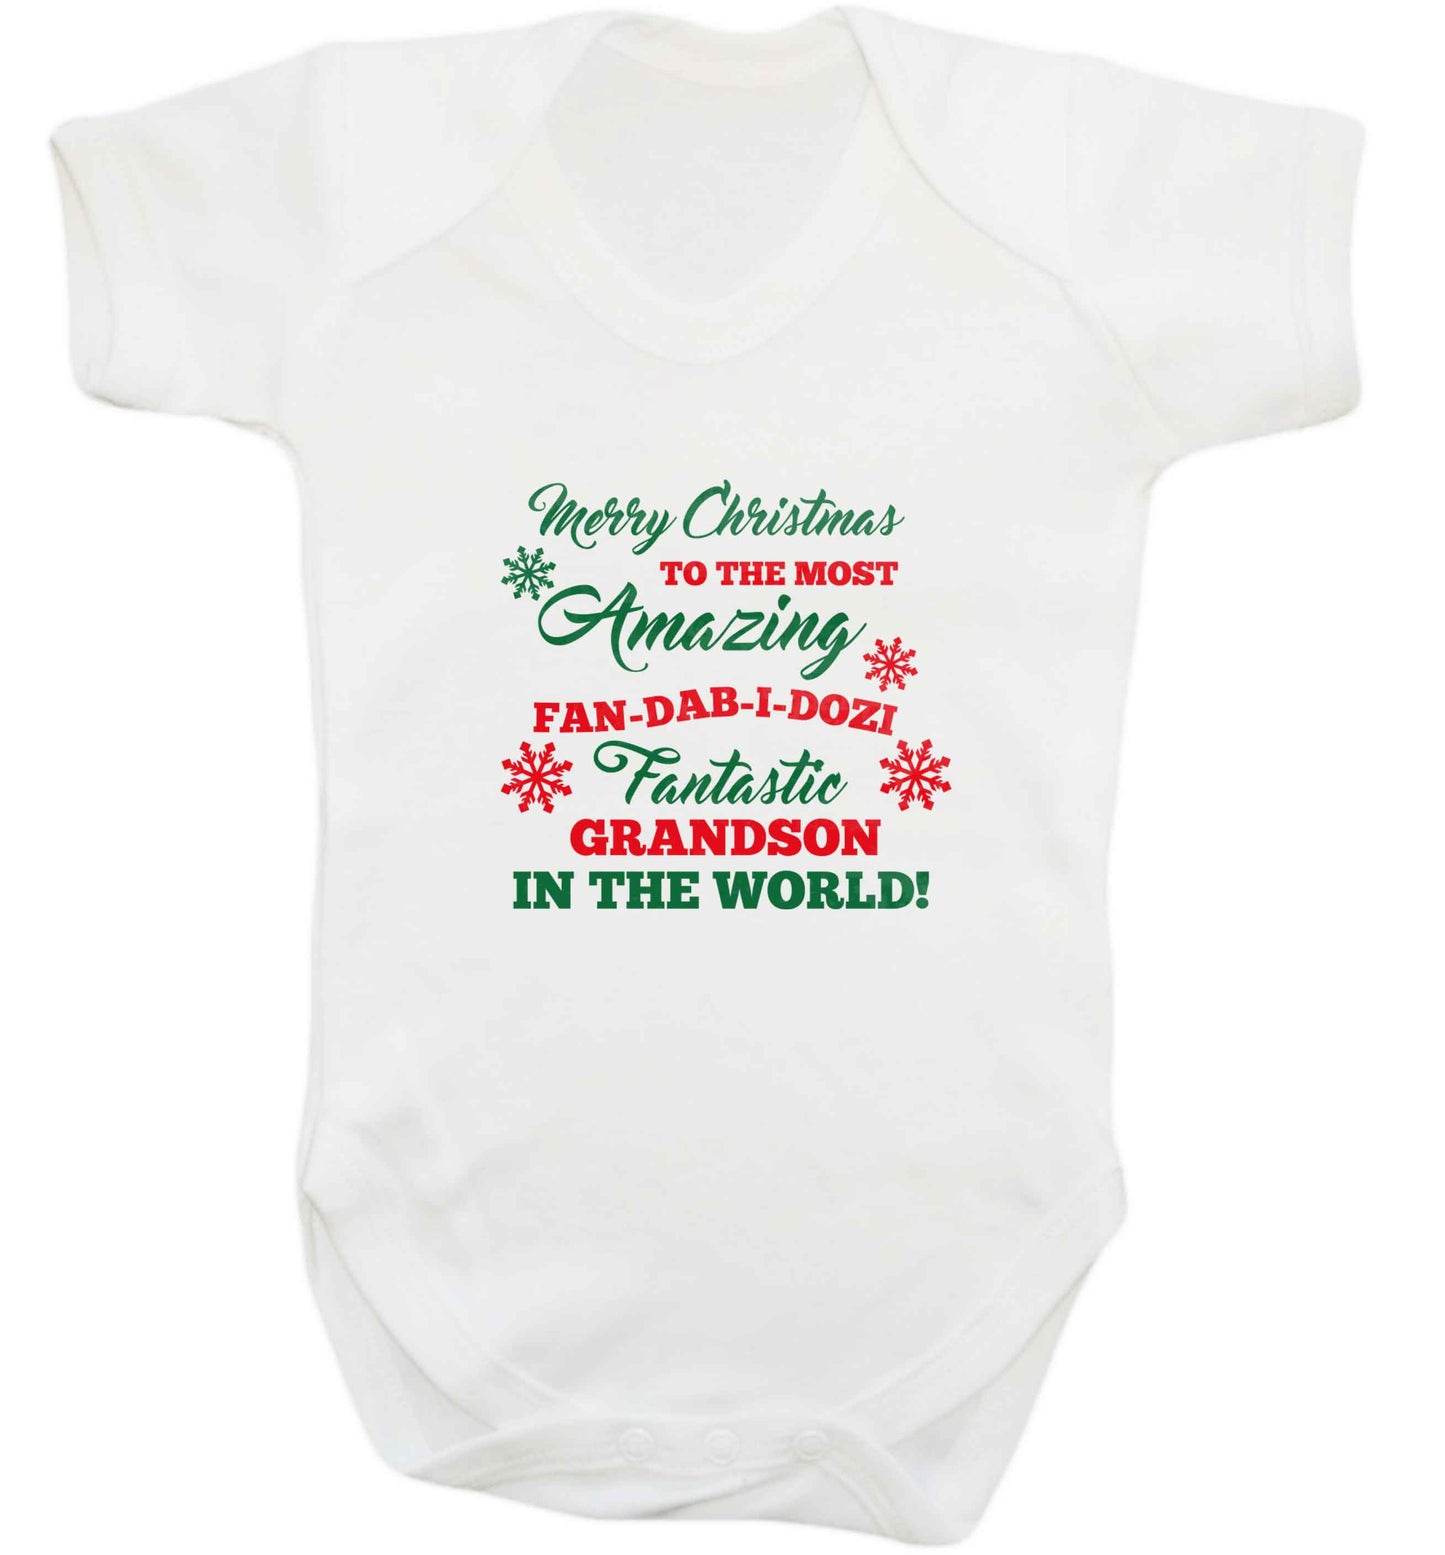 Merry Christmas to the most amazing fan-dab-i-dozi fantasic Grandson in the world baby vest white 18-24 months